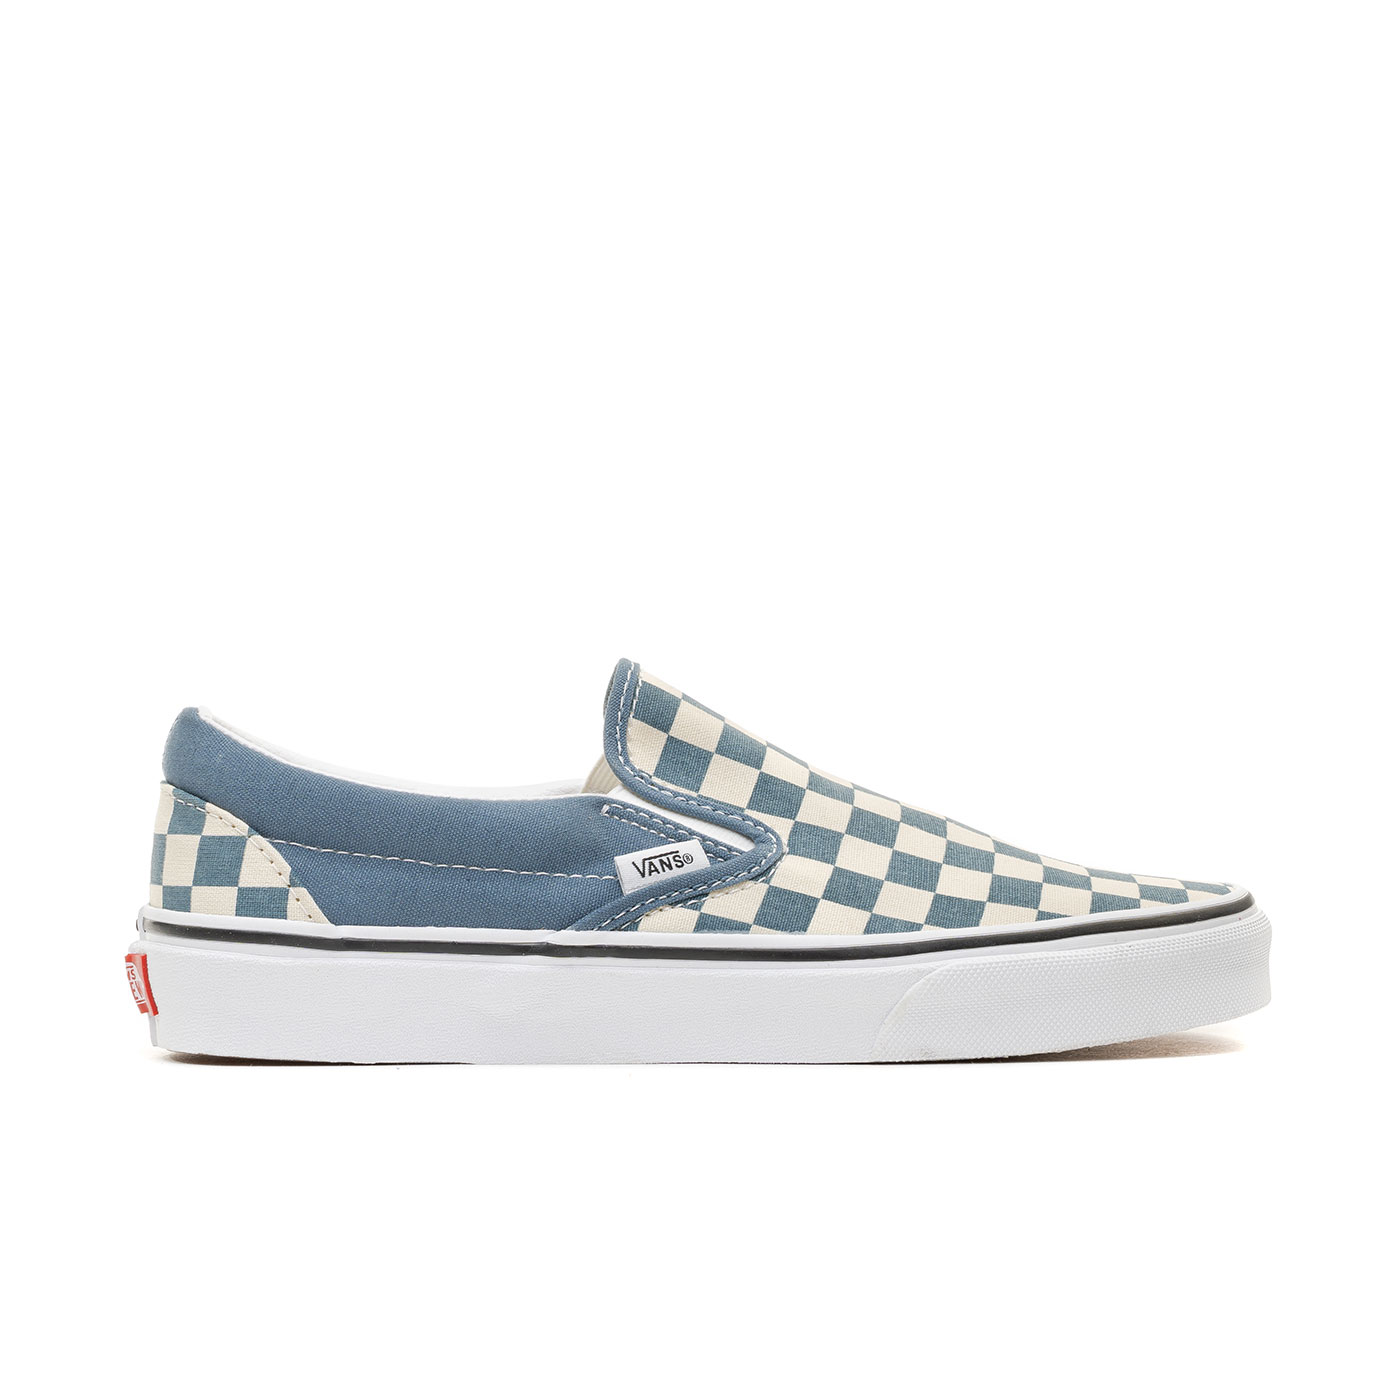 Sneakers VANS Classic Slip-On (Checkerboard) Blue for Unisex ...